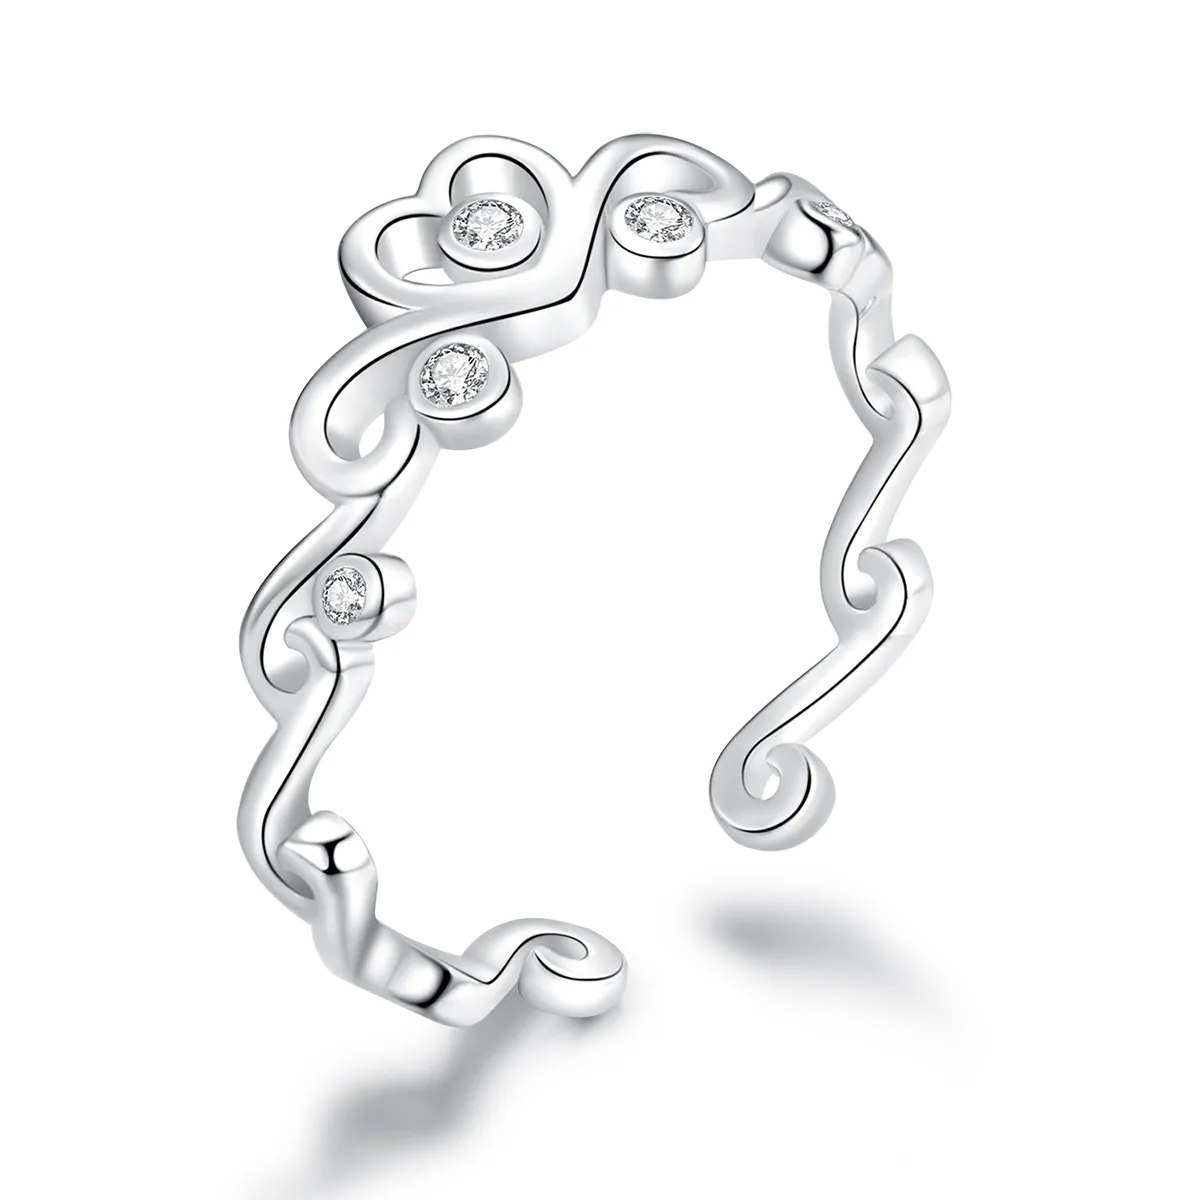 Pandora Style Silver Crown Open Ring - BSR105